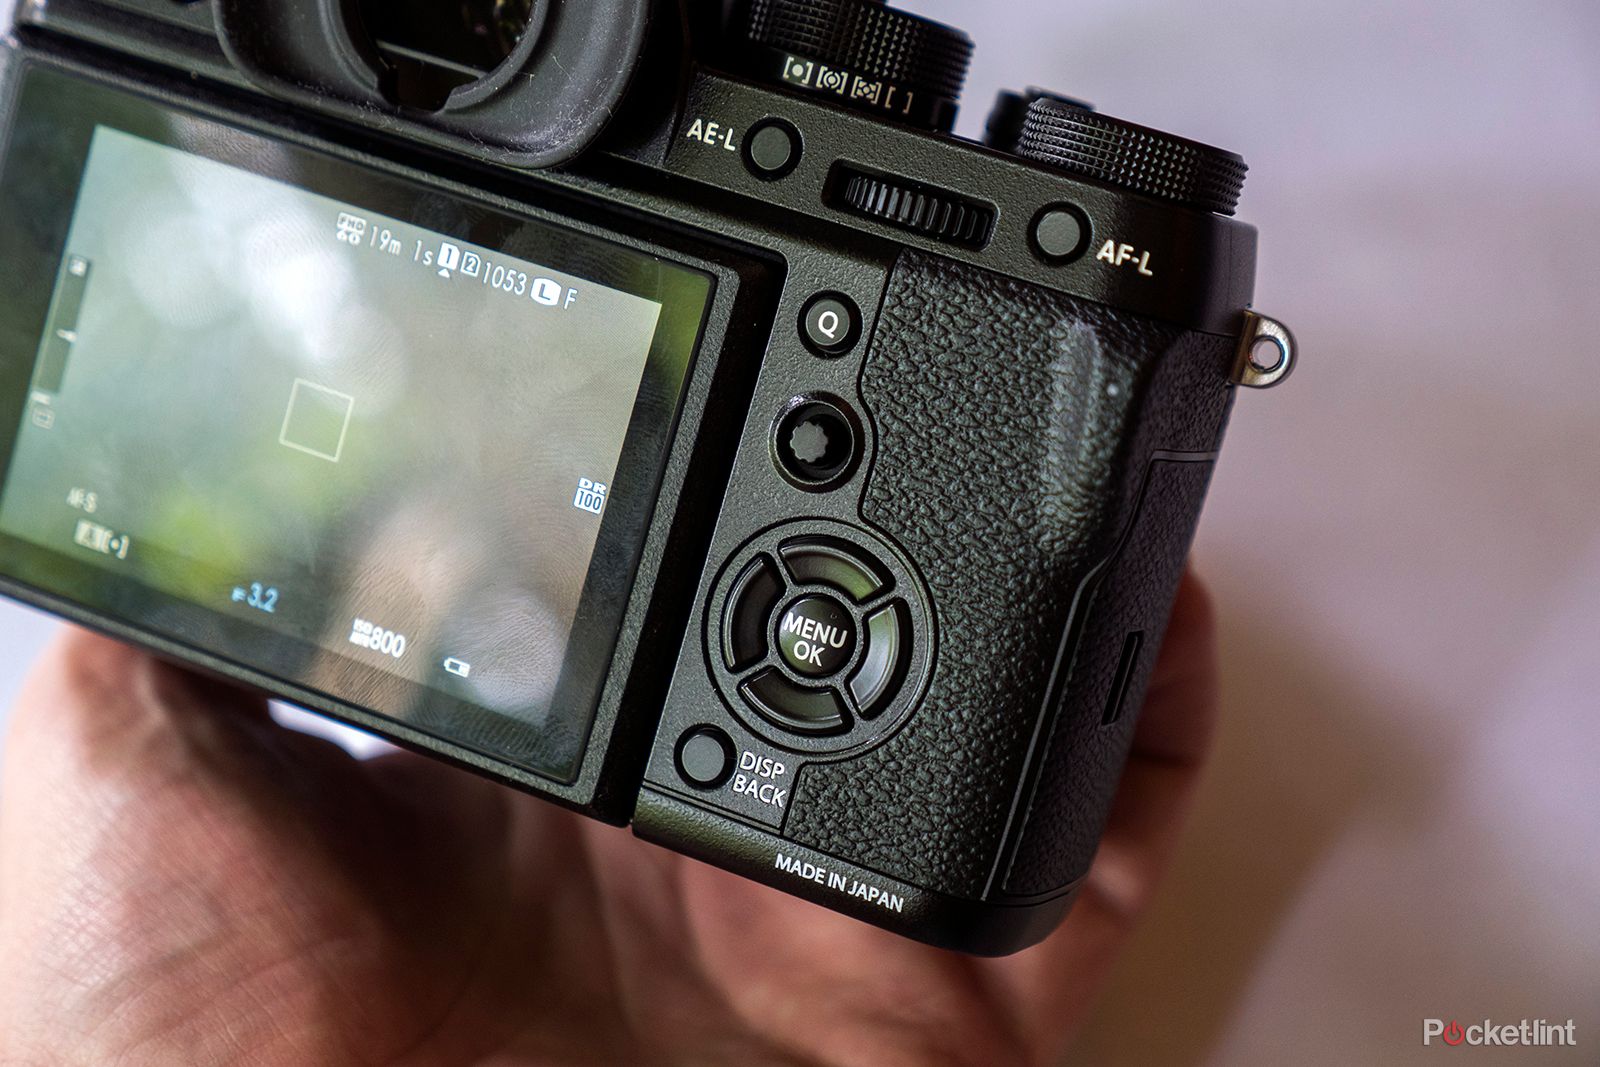 Elevating X-Trans? Fujifilm X-T2 Review: Digital Photography Review